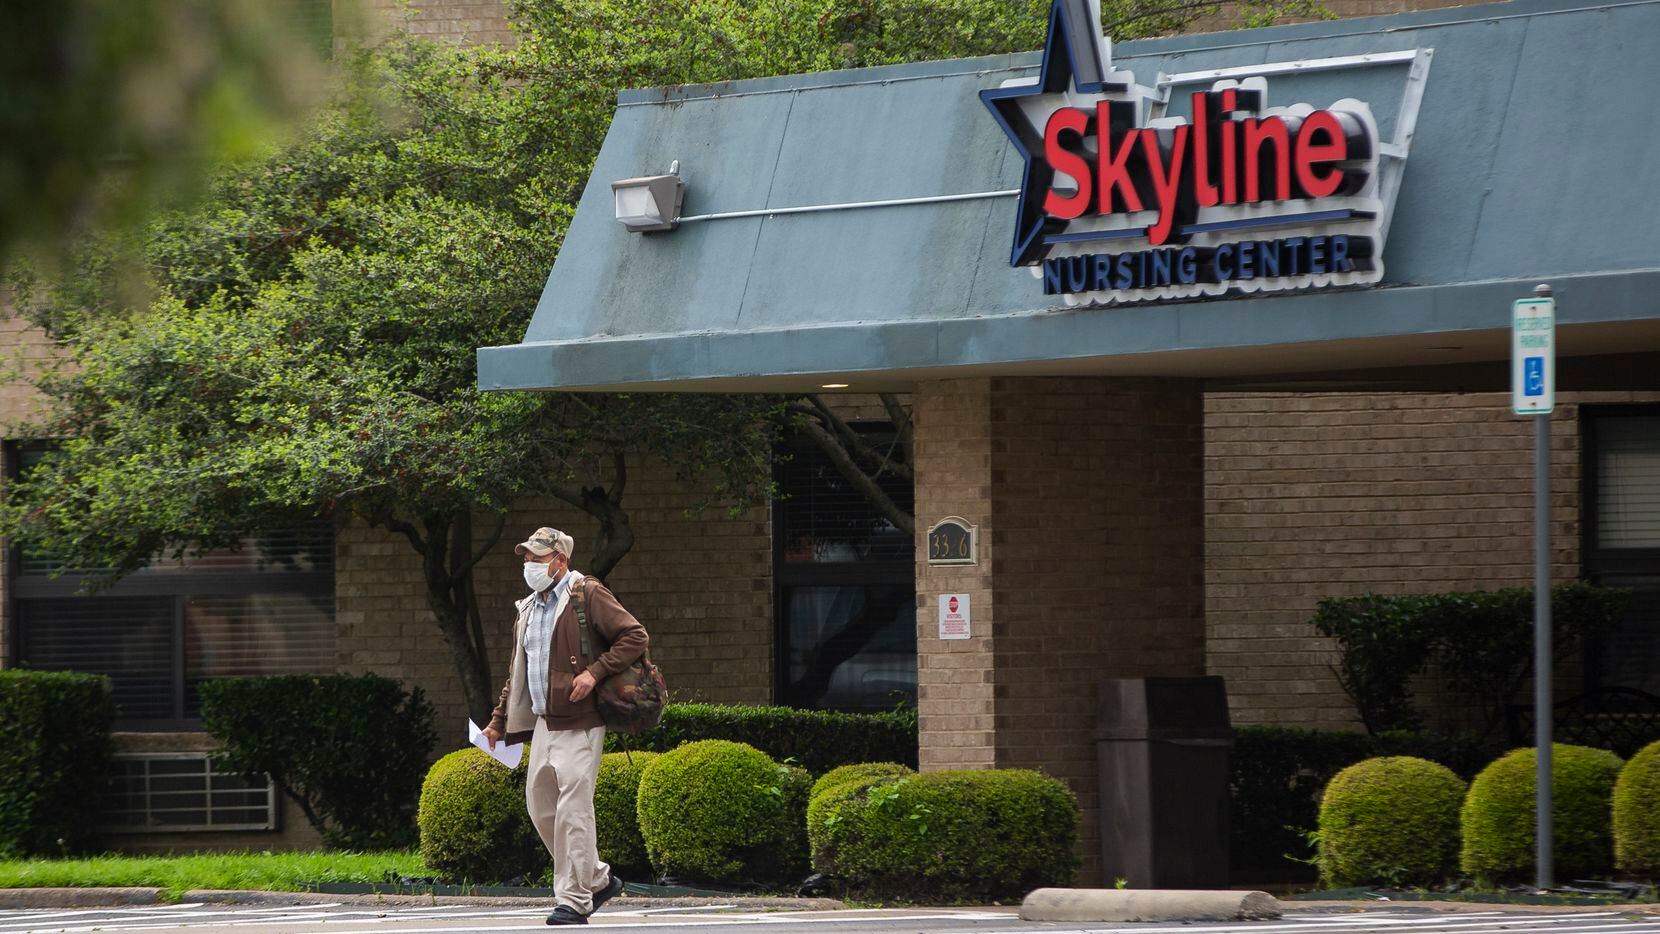 A man wearing a masks exits the Skyline Nursing Center in Oak Cliff on March 30, 2020 in...